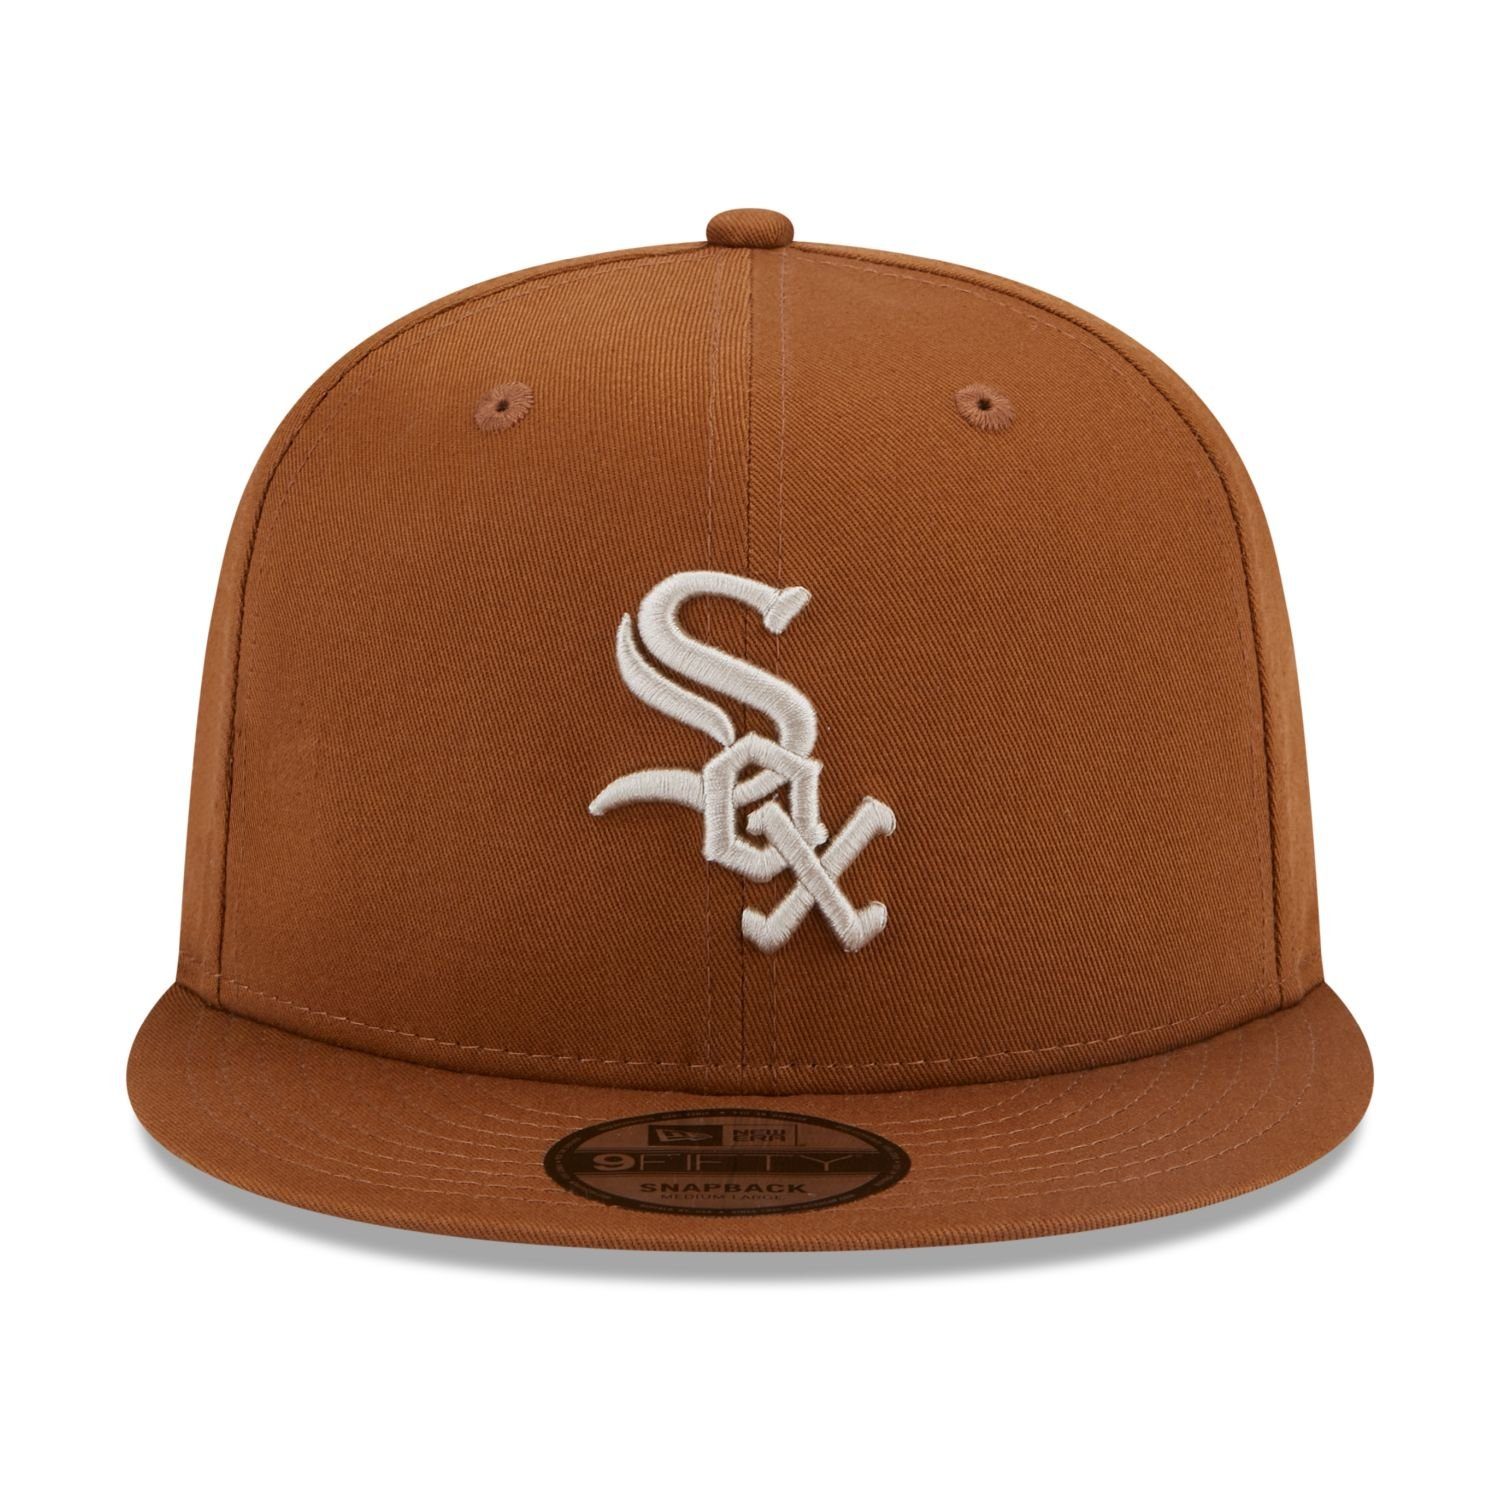 Chicago Era 9Fifty Sox New Snapback SIDEPATCH White Cap